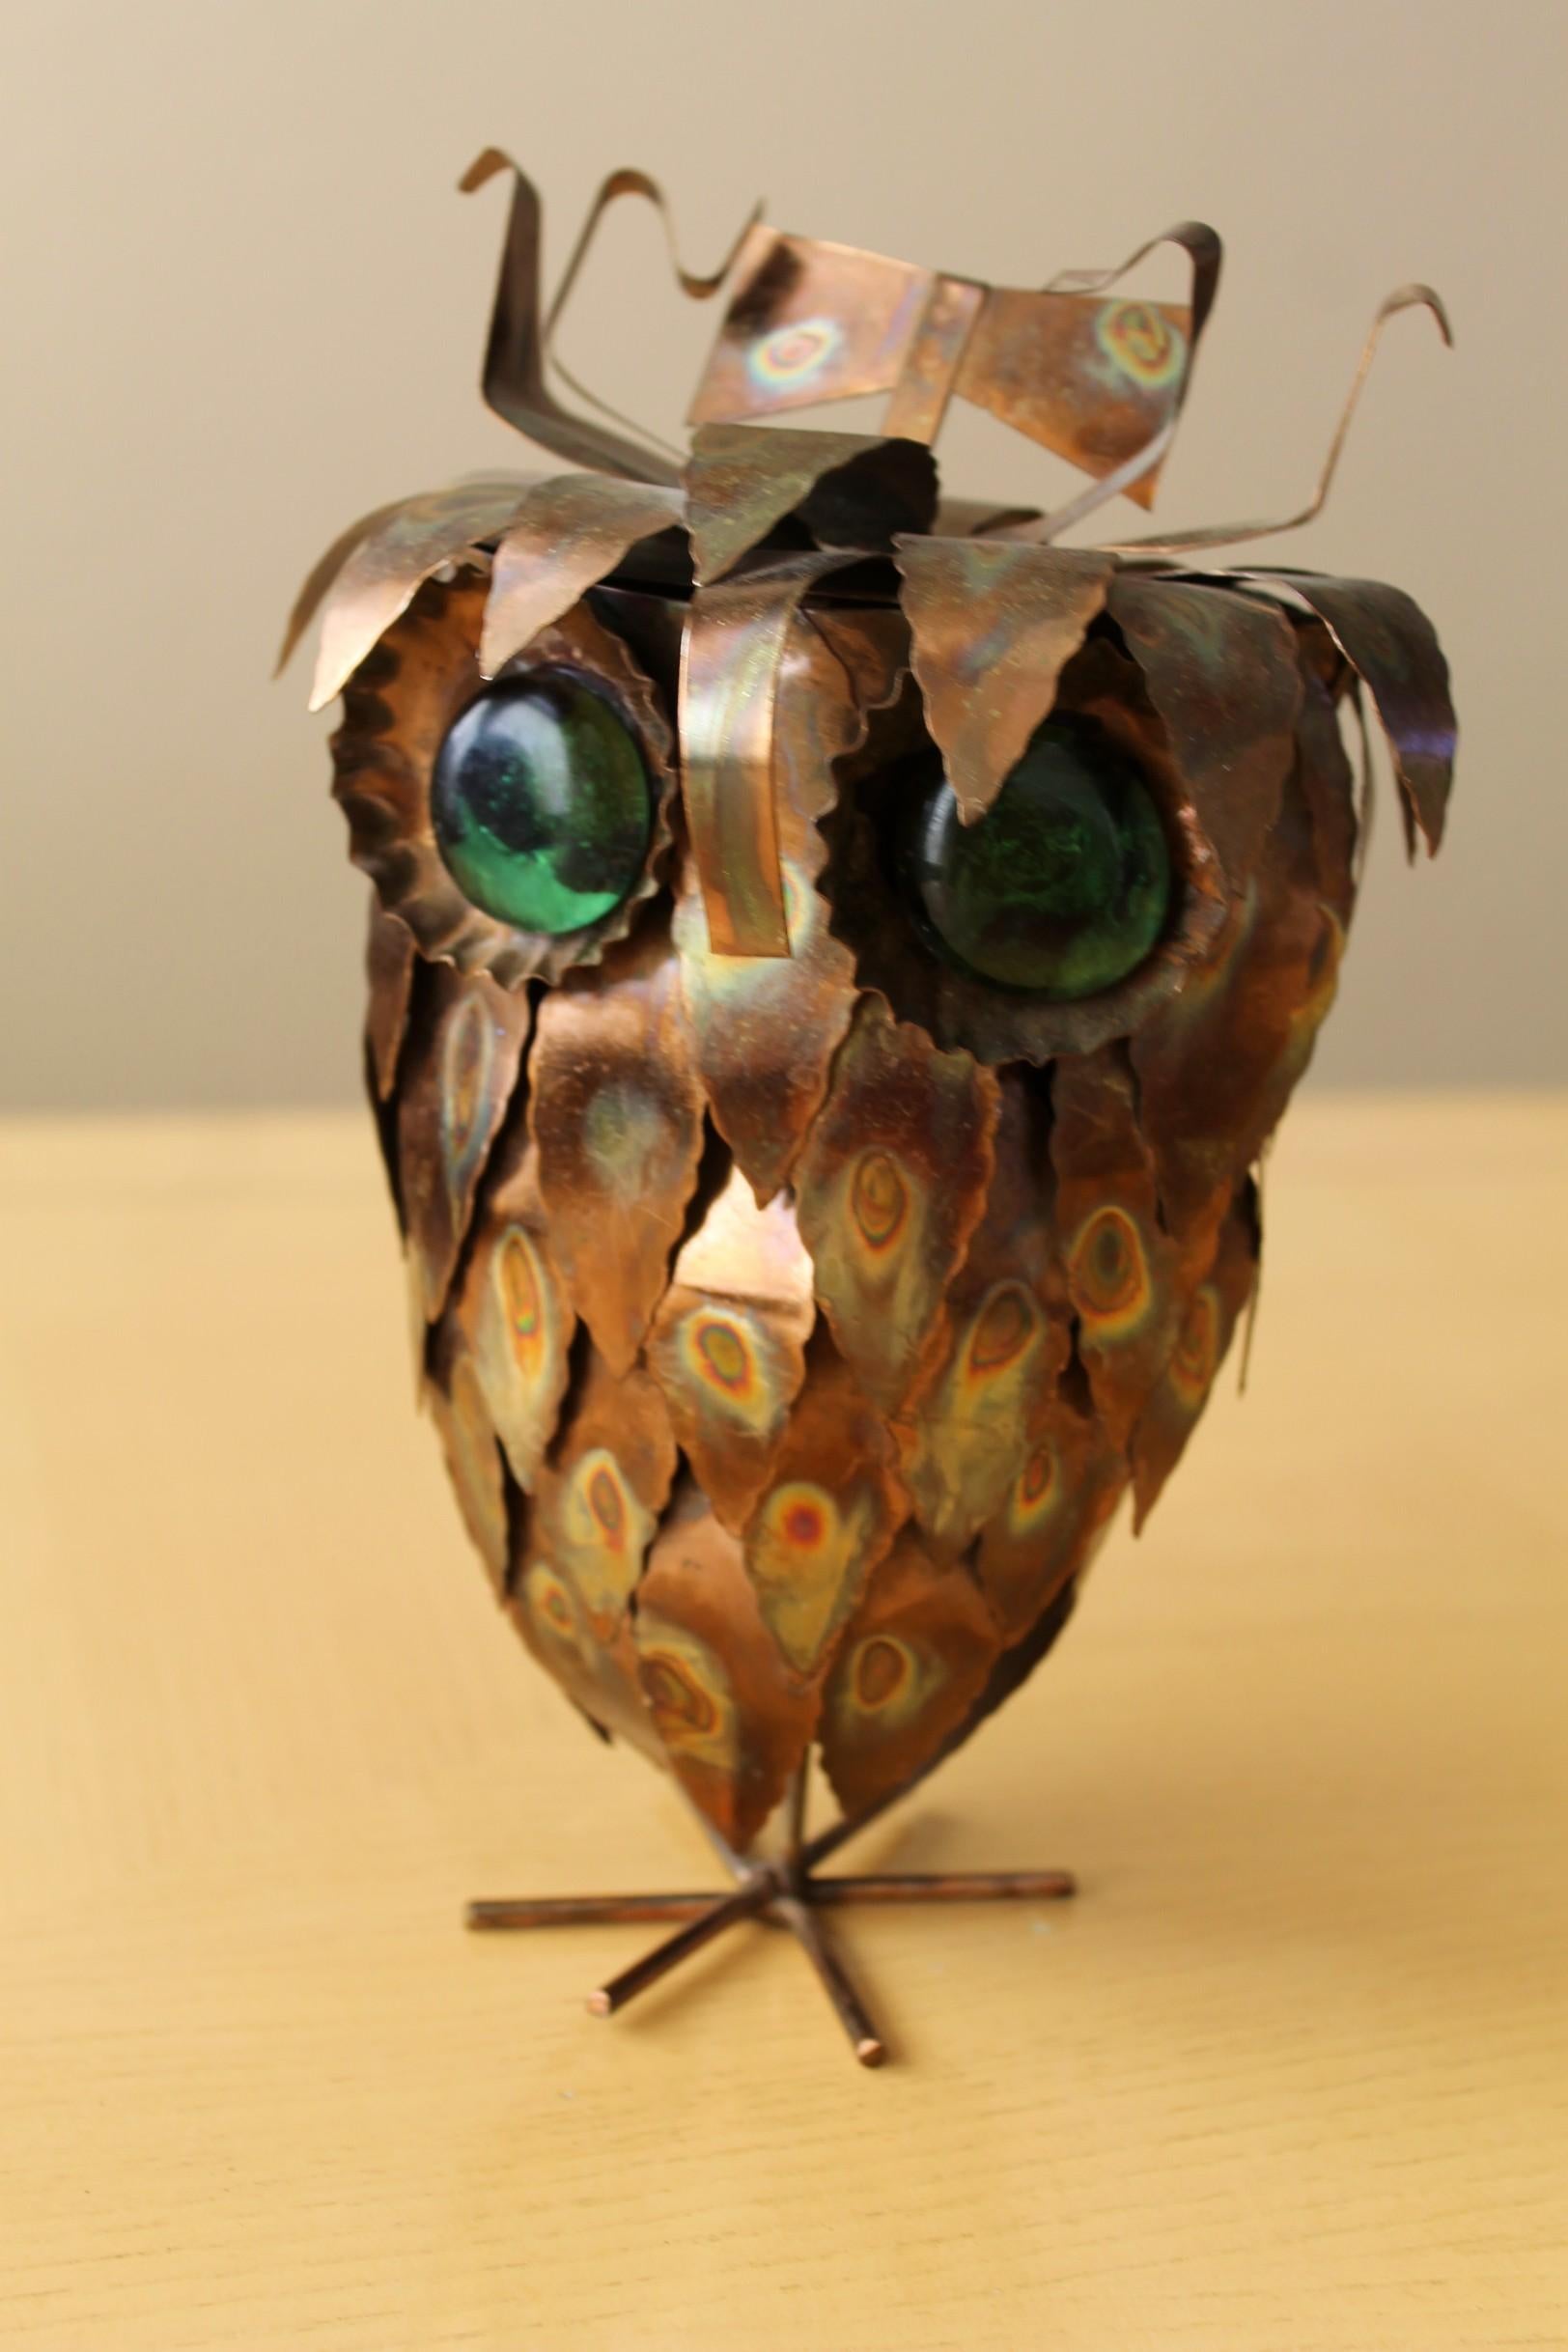 Adorable!

Mid Cnetury Modern
Brutalist Torch Cut 
Metal Owl

Green Eyes

Here is a marvelous 1970s brutalist, torch cut owl with a very appealing look!  These owls were made popular by metal artisan Curtis Jere.   This piece is an iconic example of